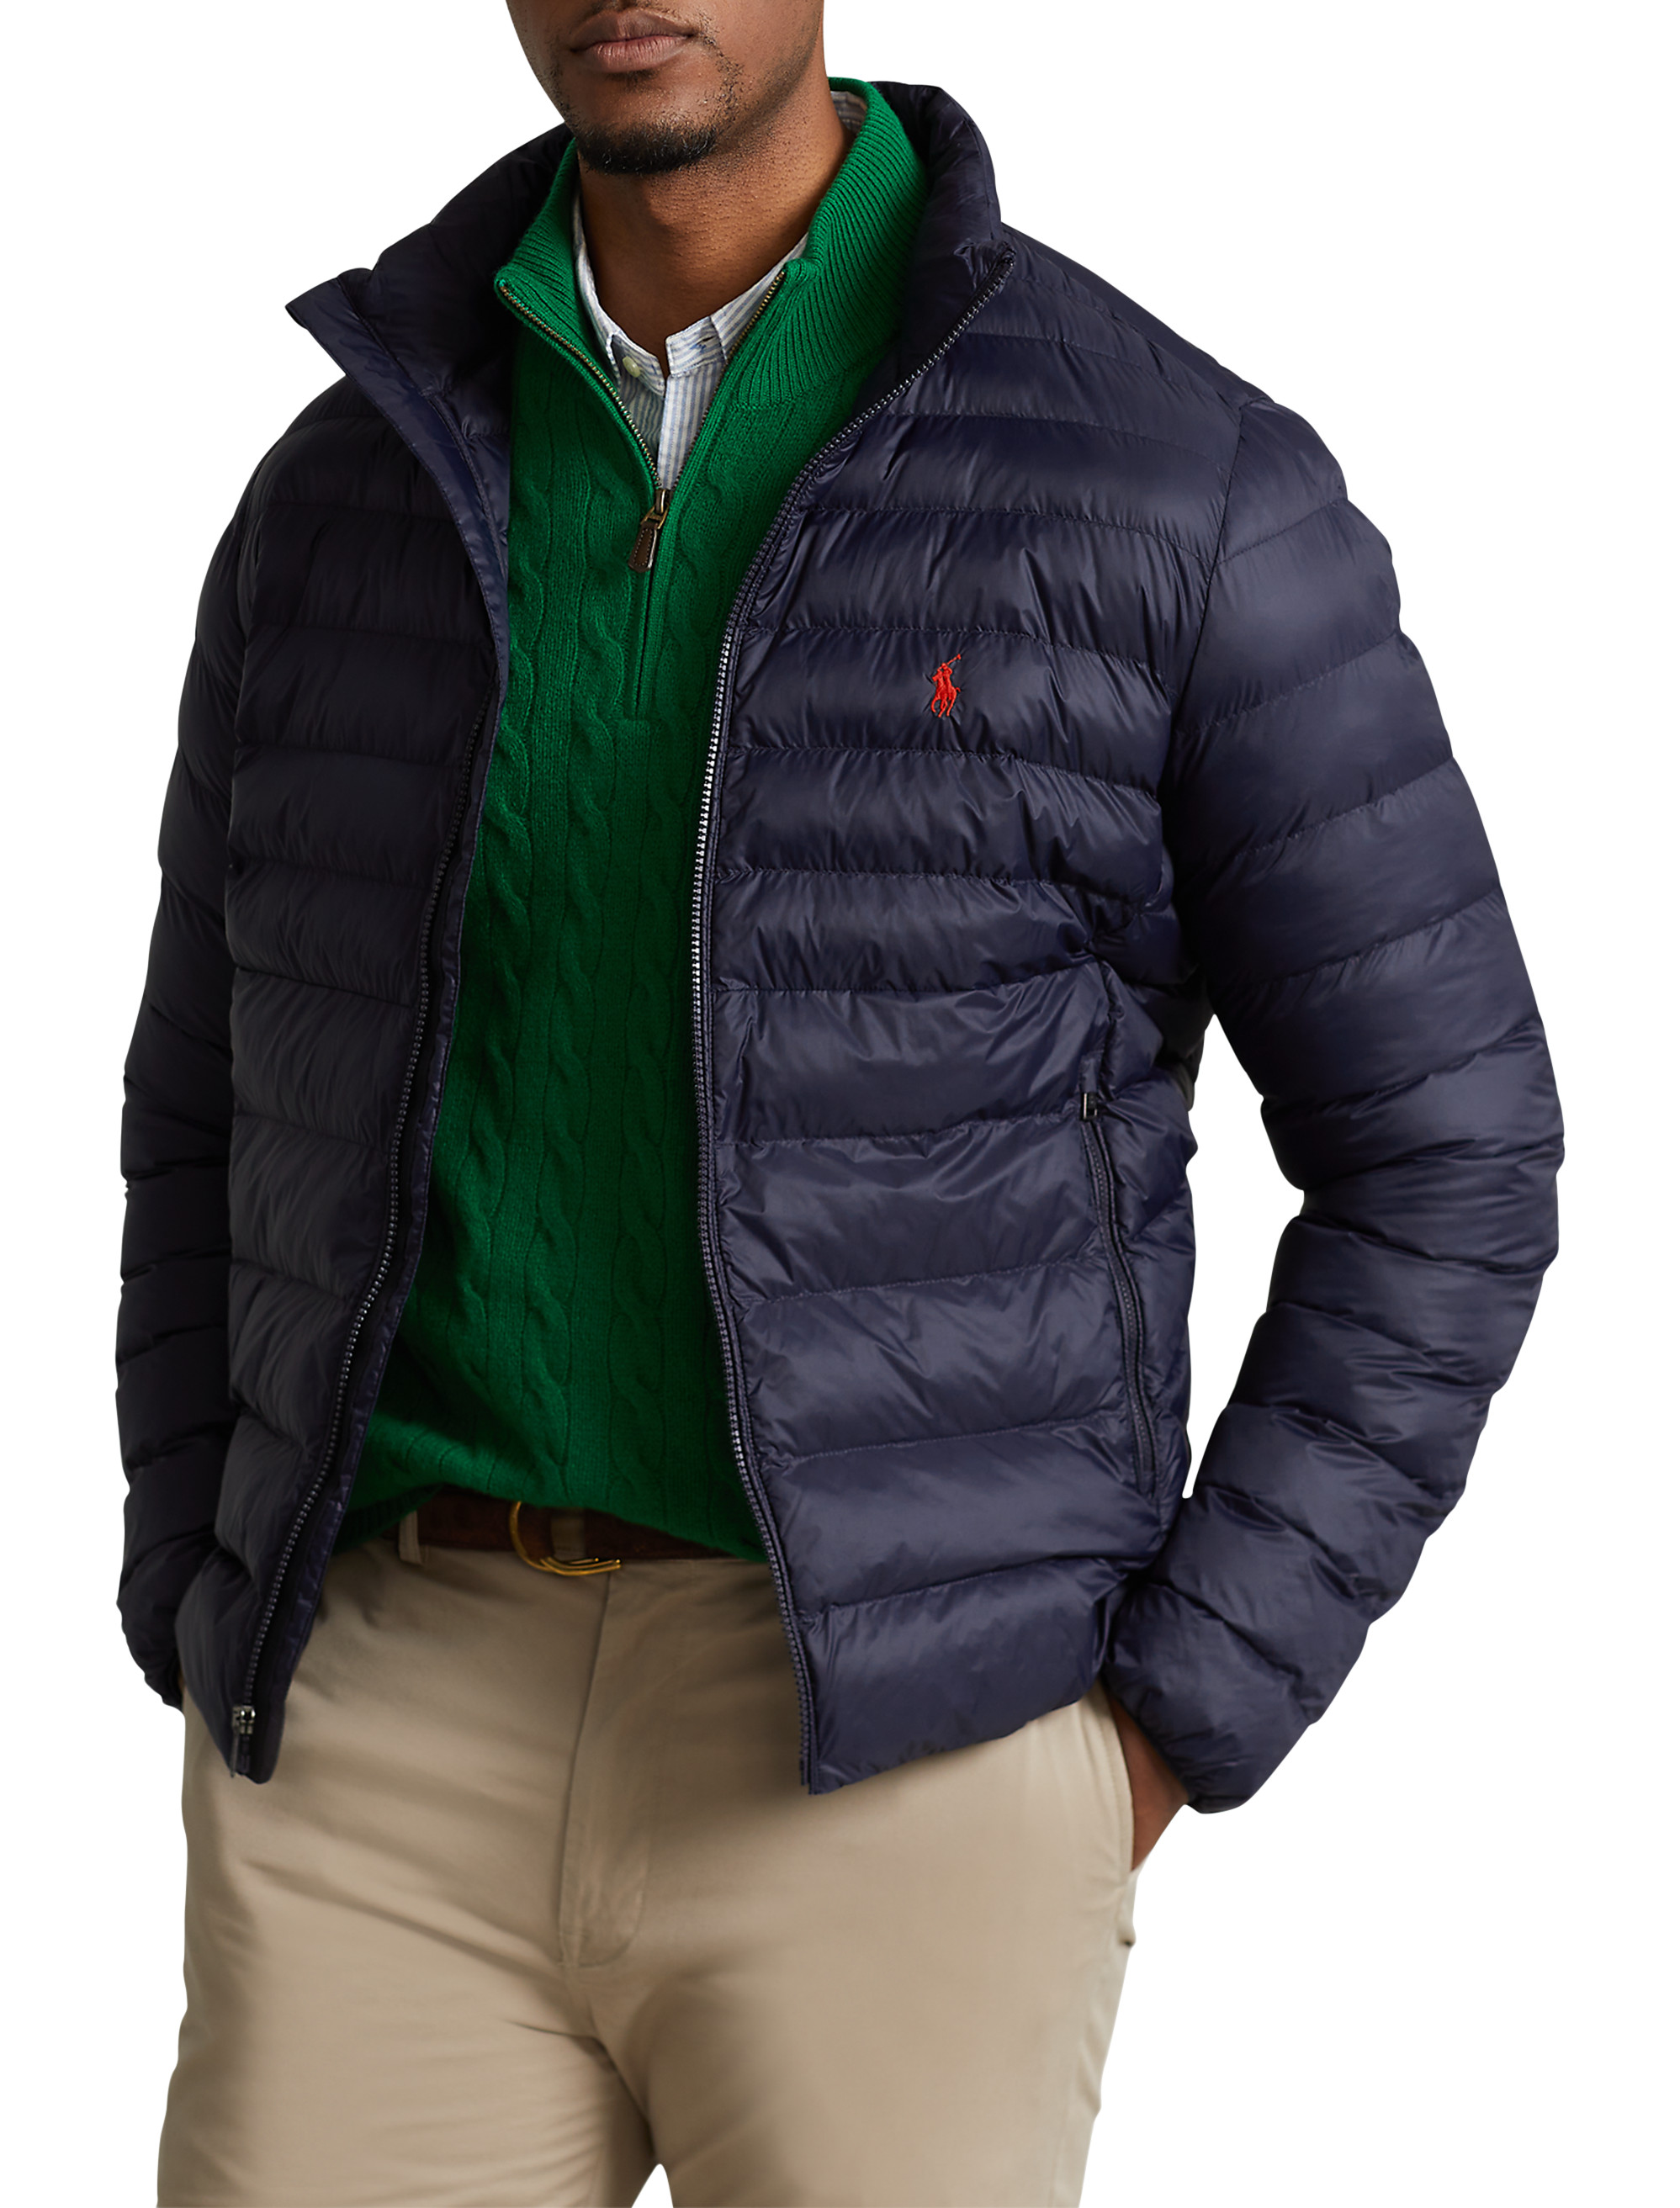 Polo Ralph Lauren Big & Tall Packable Jacket Green Color Size 3XB